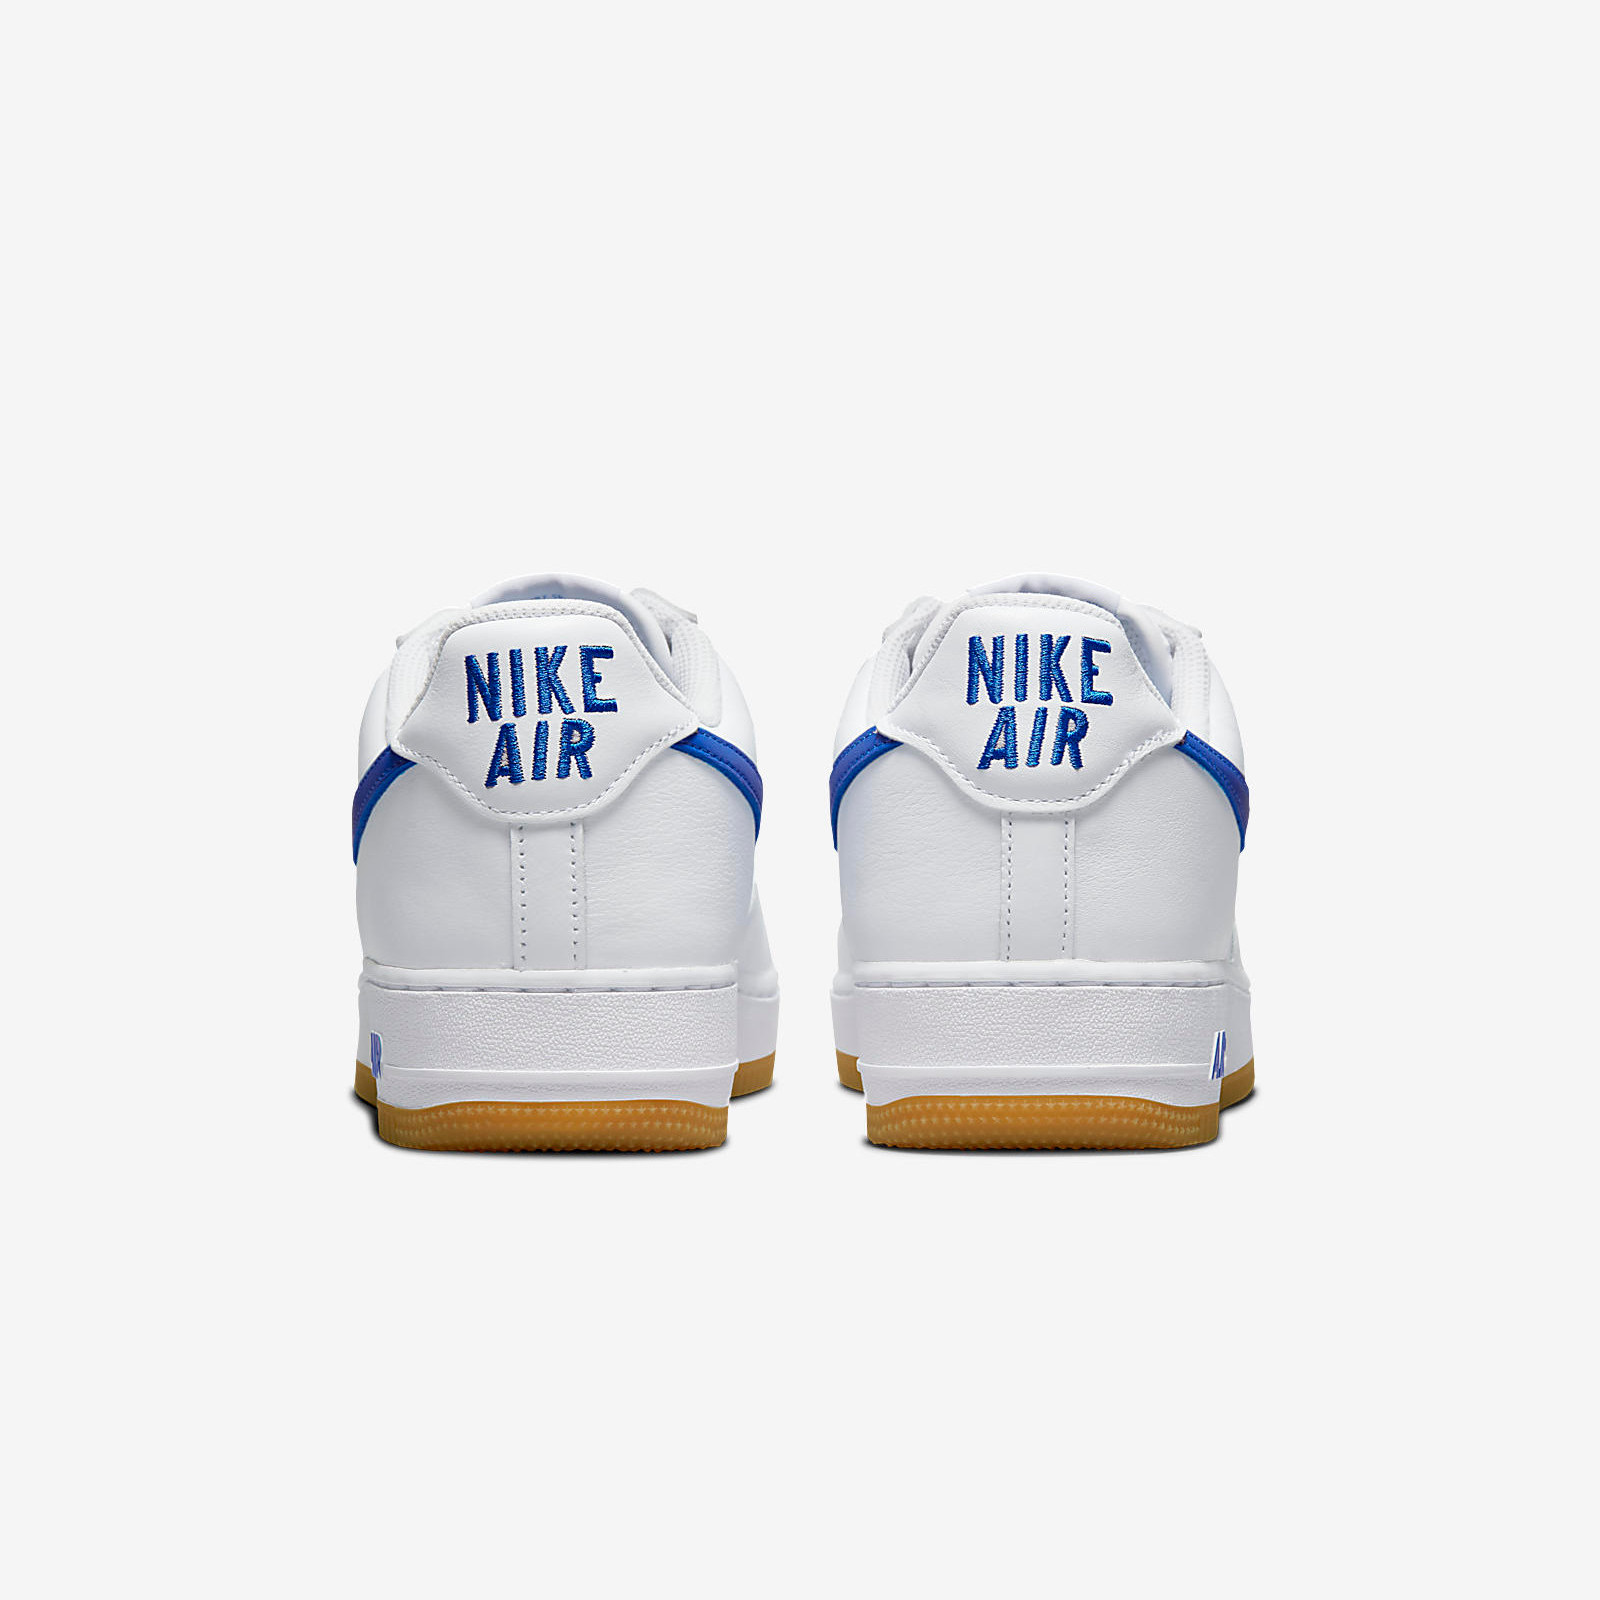 Nike Air Force 1 Low
Color of the Month
« Varsity Royal »